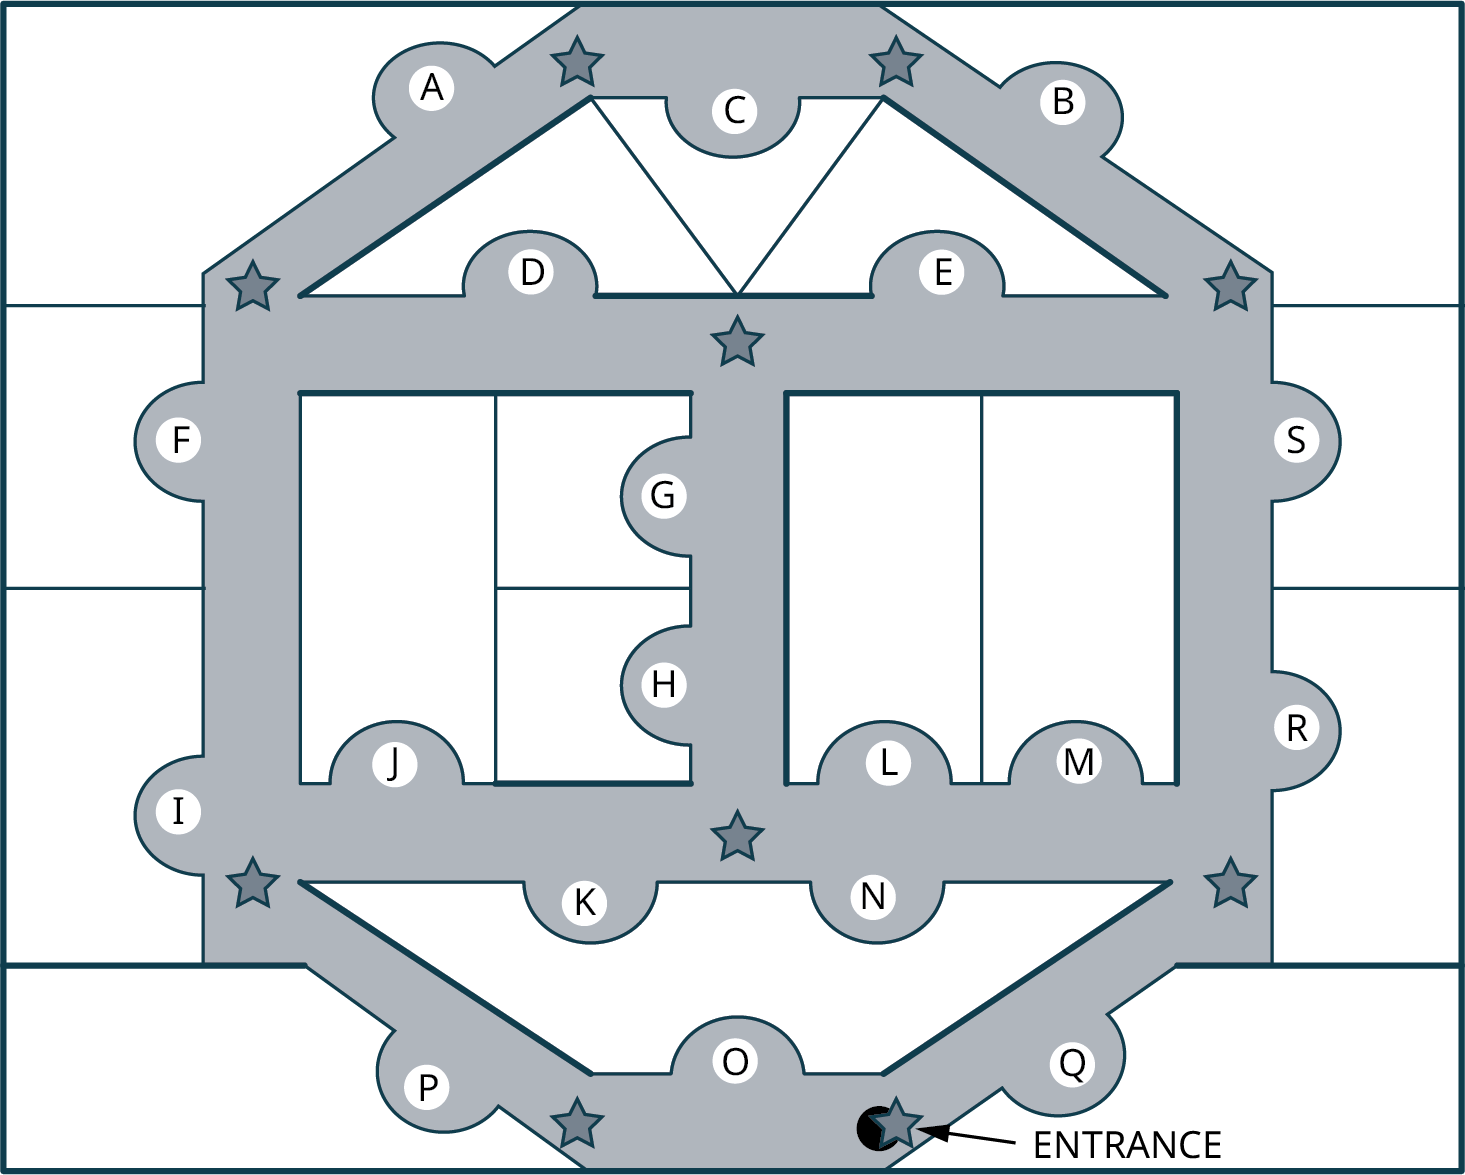 A map of aquarium exhibits. The vertices are labeled A to S. The entrance is at the bottom.